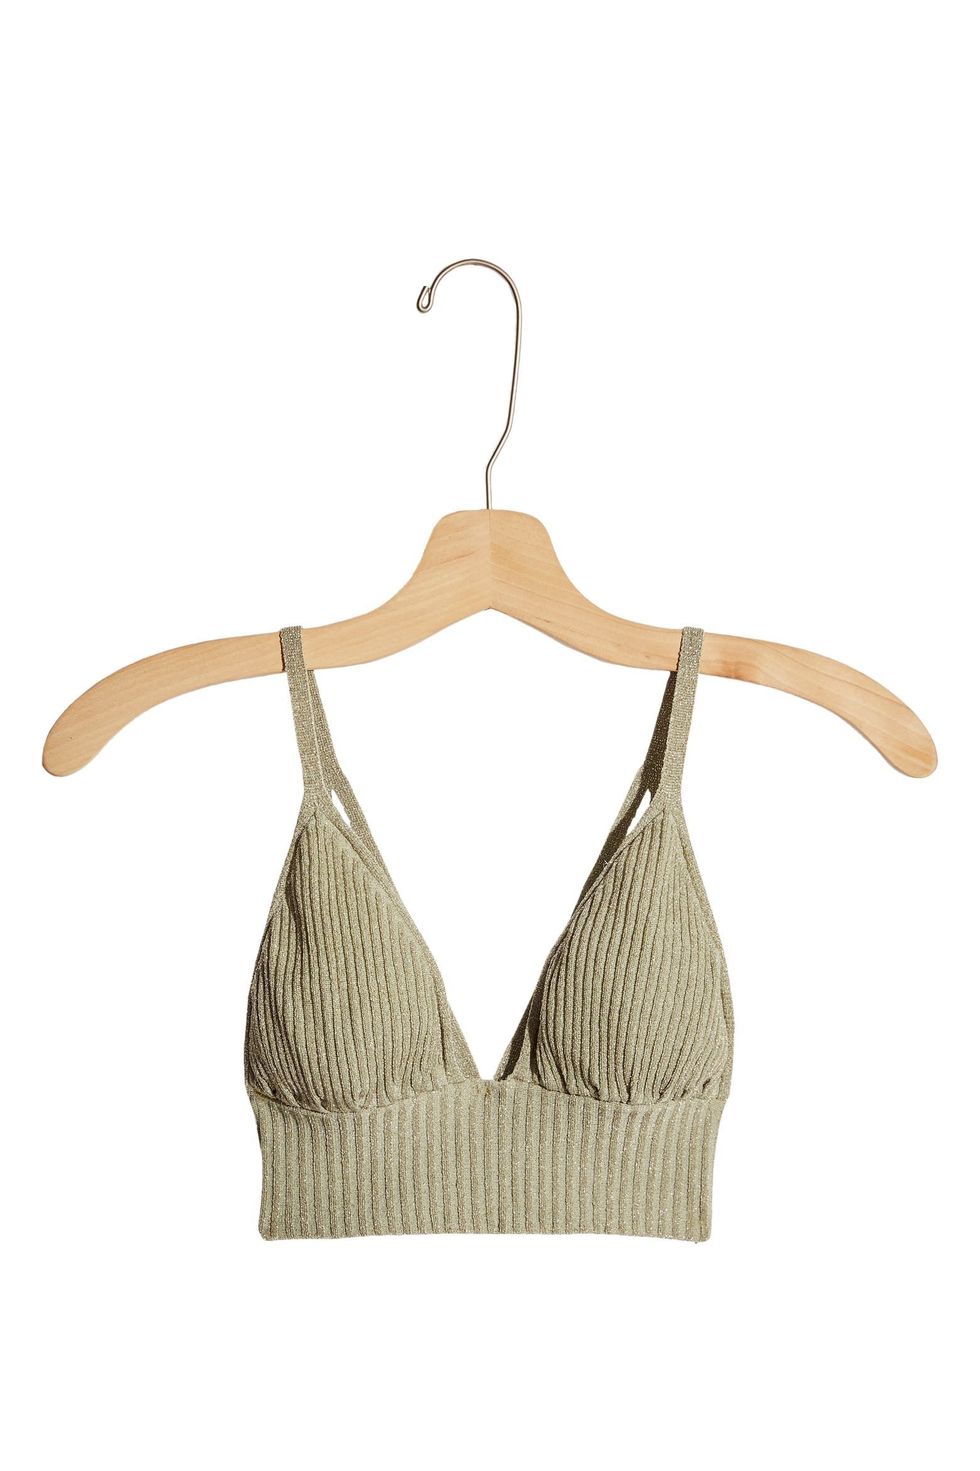 Knit Bralette Crop Top for Women, Green Knit Cotton Cami, Think Knit Bra  Top, Loungewear Bralette, Perfect Sexy Gift for Her -  Canada